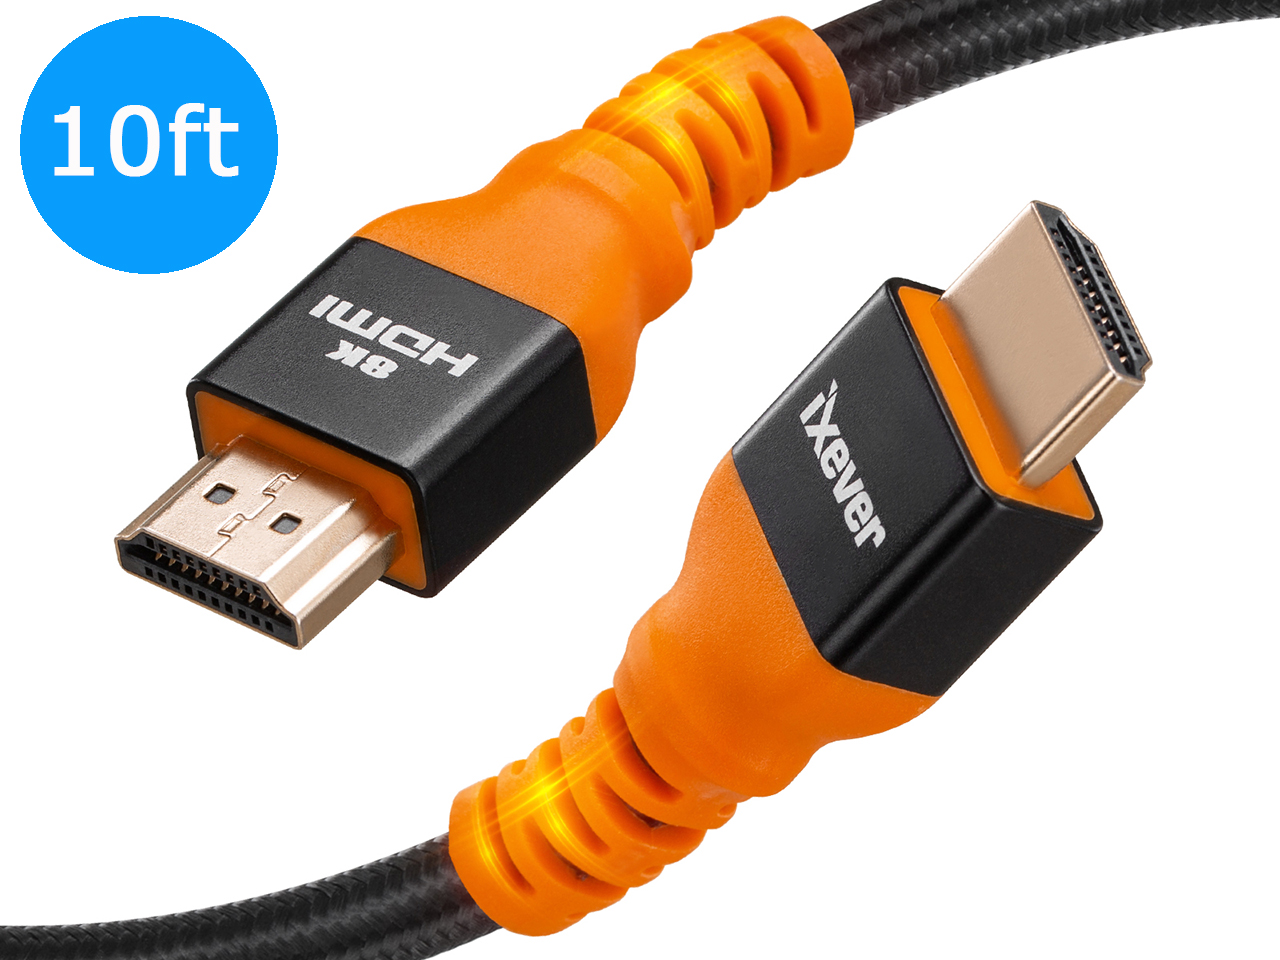 3m (10ft) HDMI Cable - 4K High Speed HDMI Cable with Ethernet - UHD 4K 30Hz  Video - HDMI 1.4 Cable - Ultra HD HDMI Monitors, Projectors, TVs 